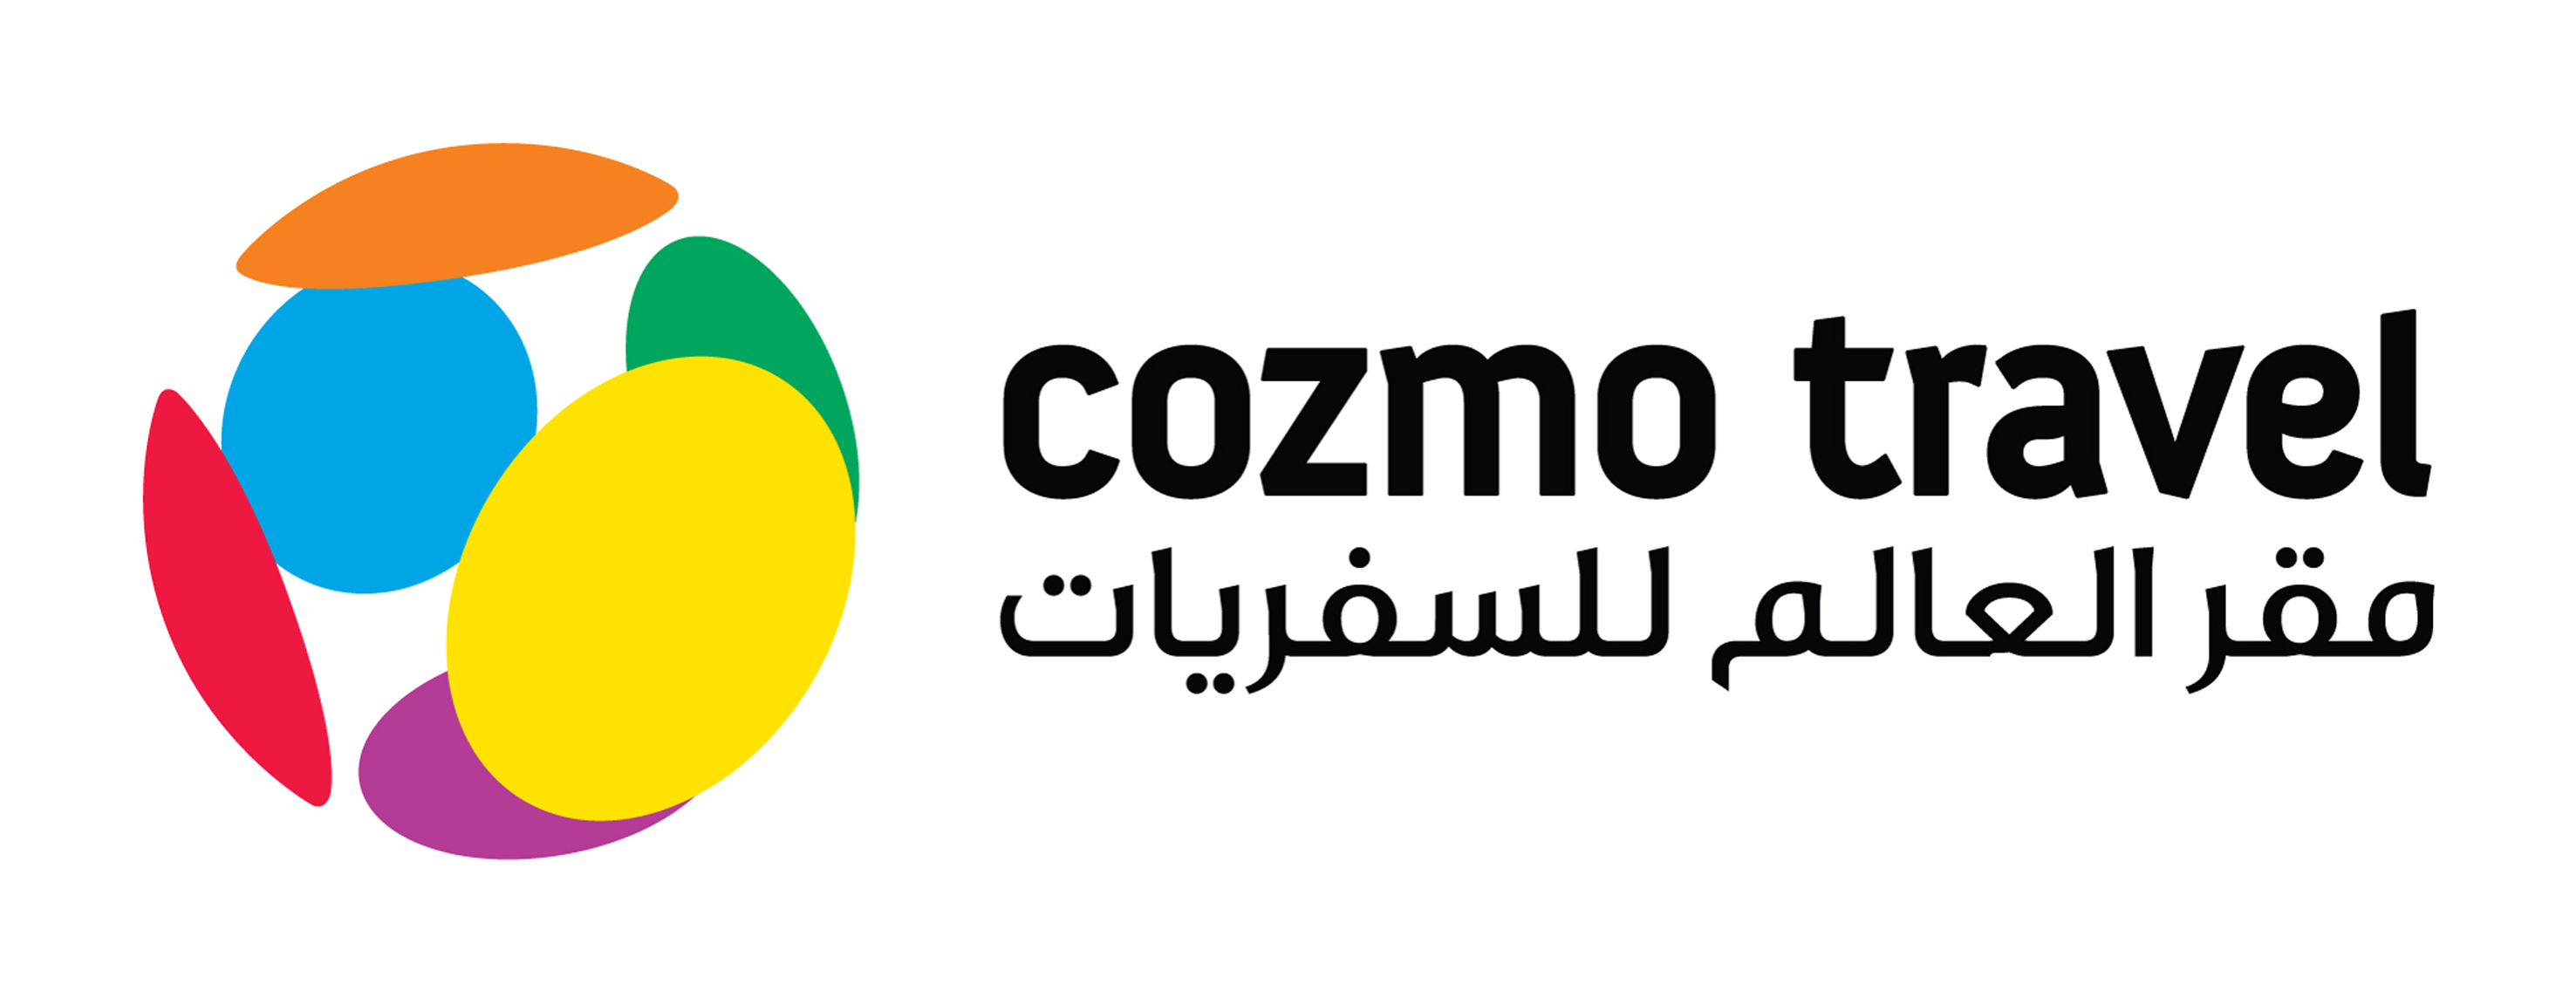 cozmo travel world private limited